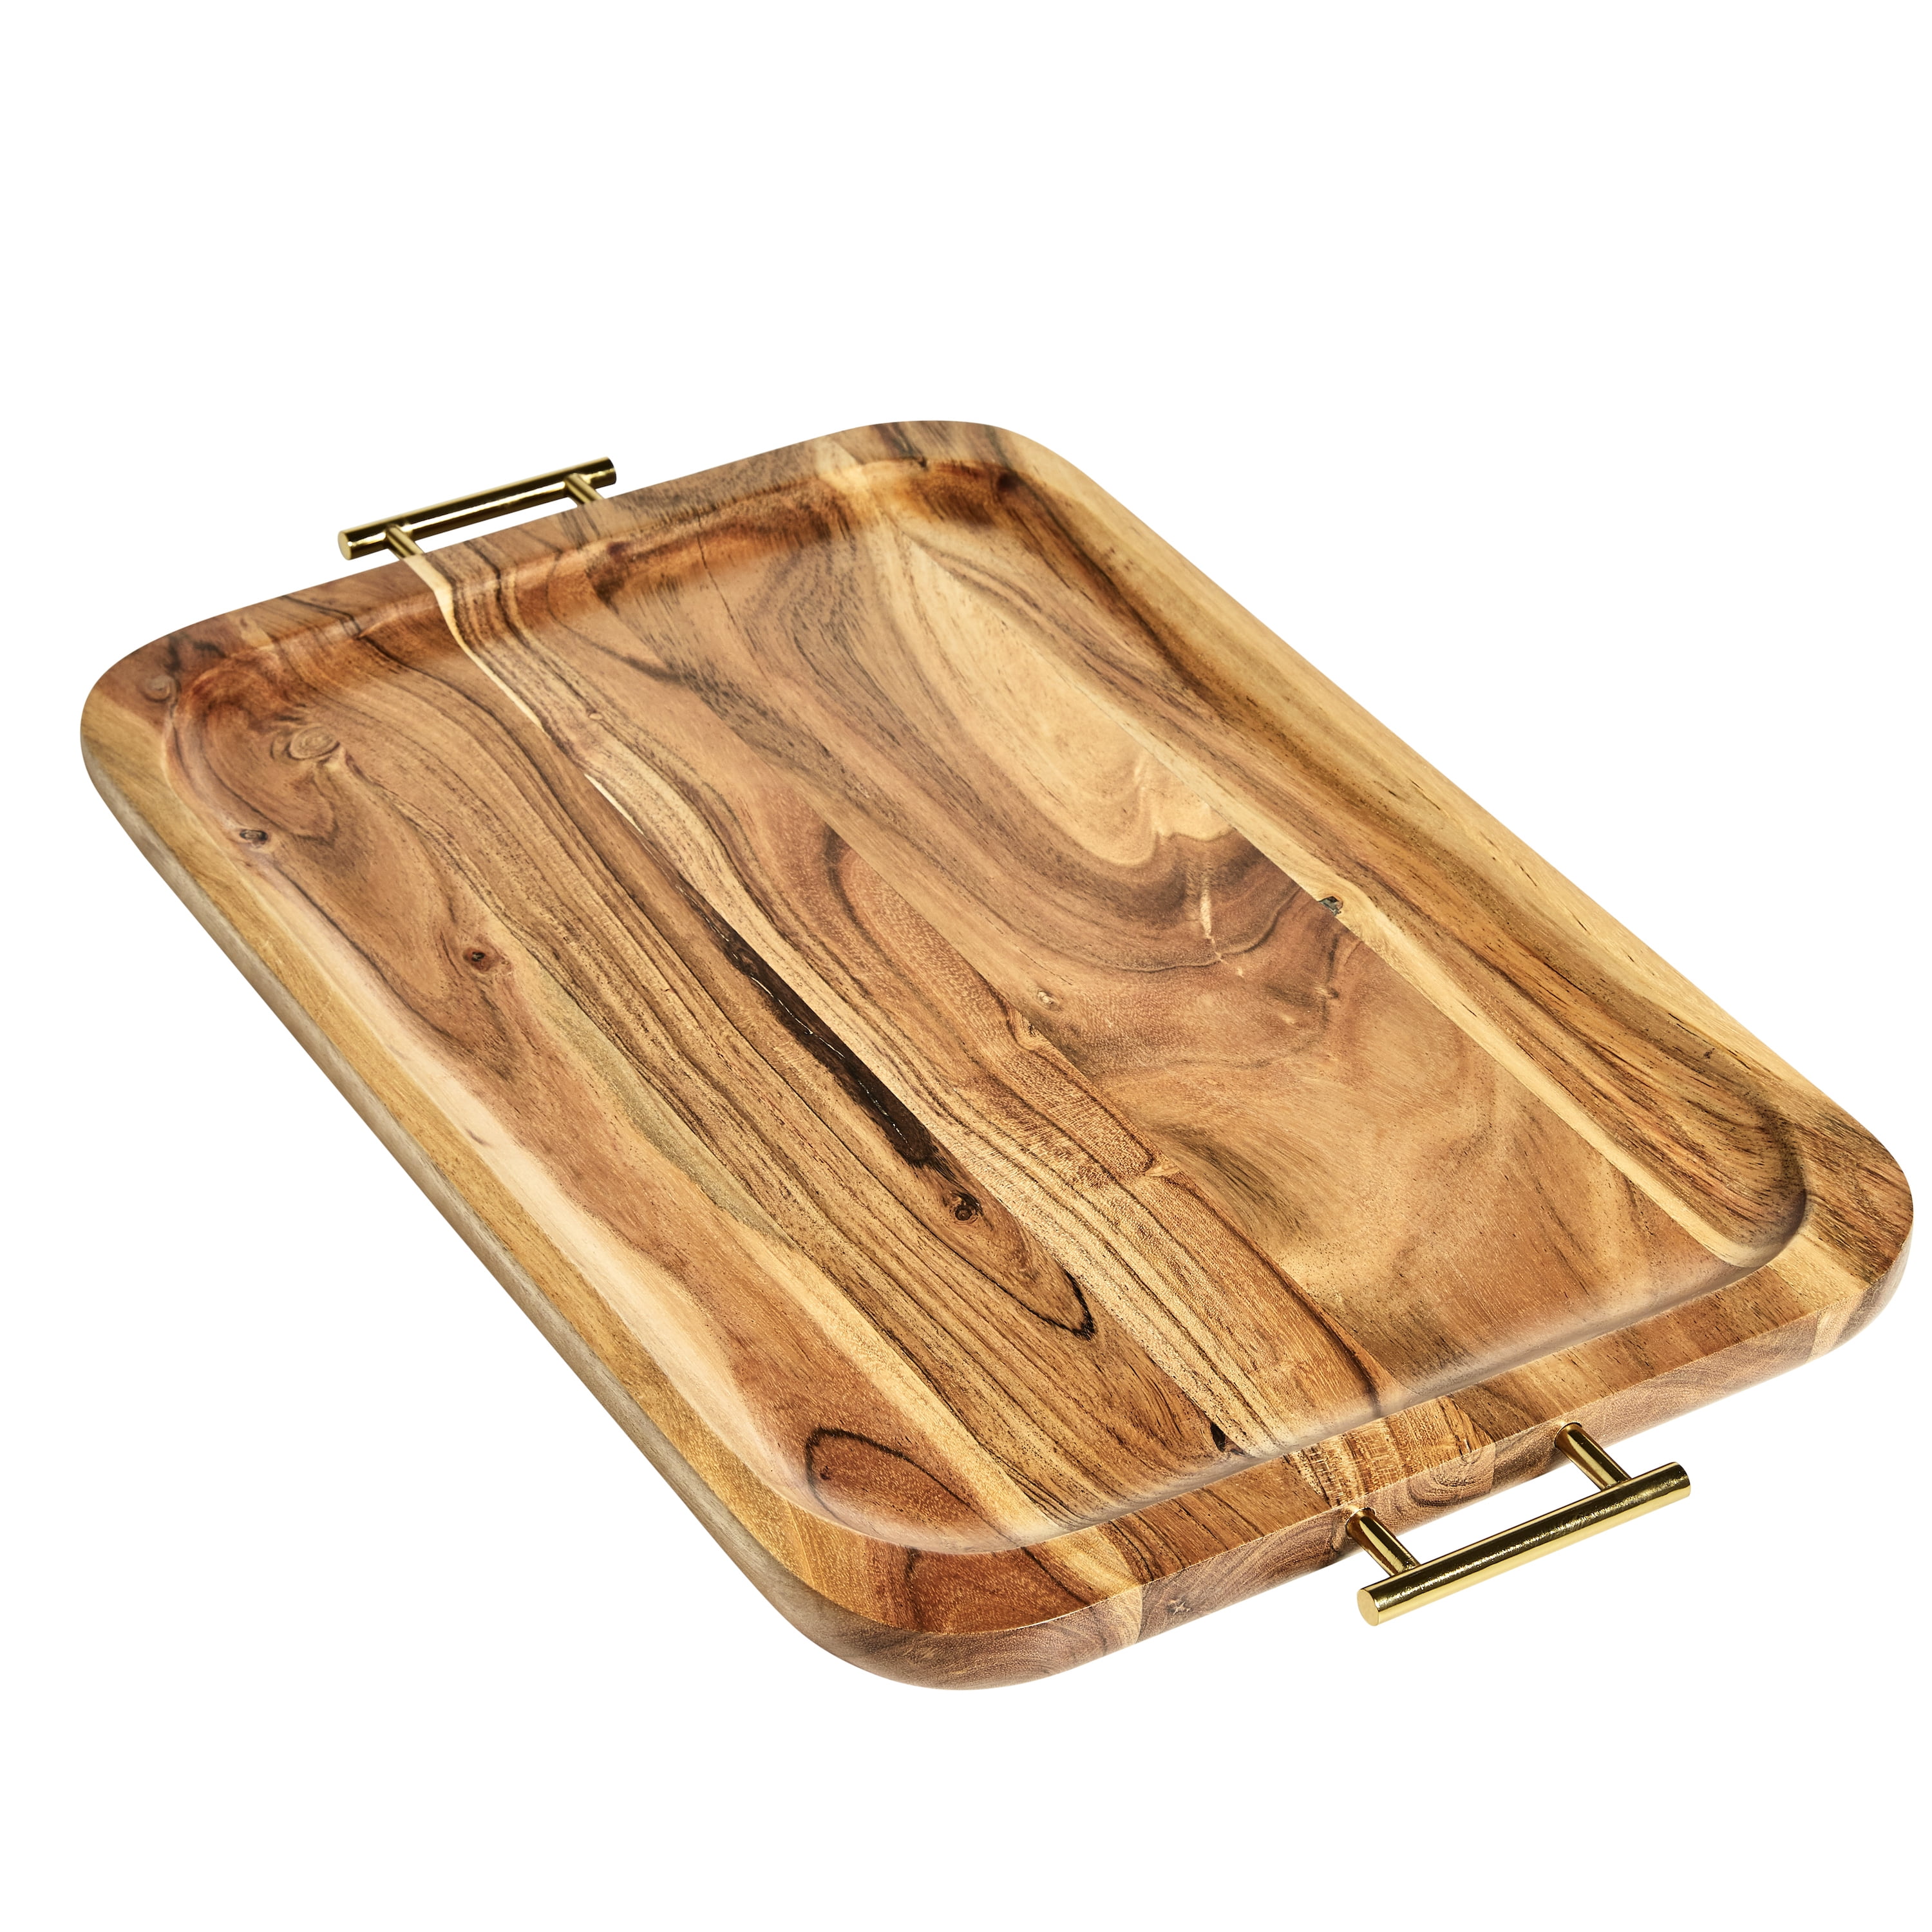 Better Homes & Gardens Acacia Wood Rectangle Tray with Gold Color Handles, One Size